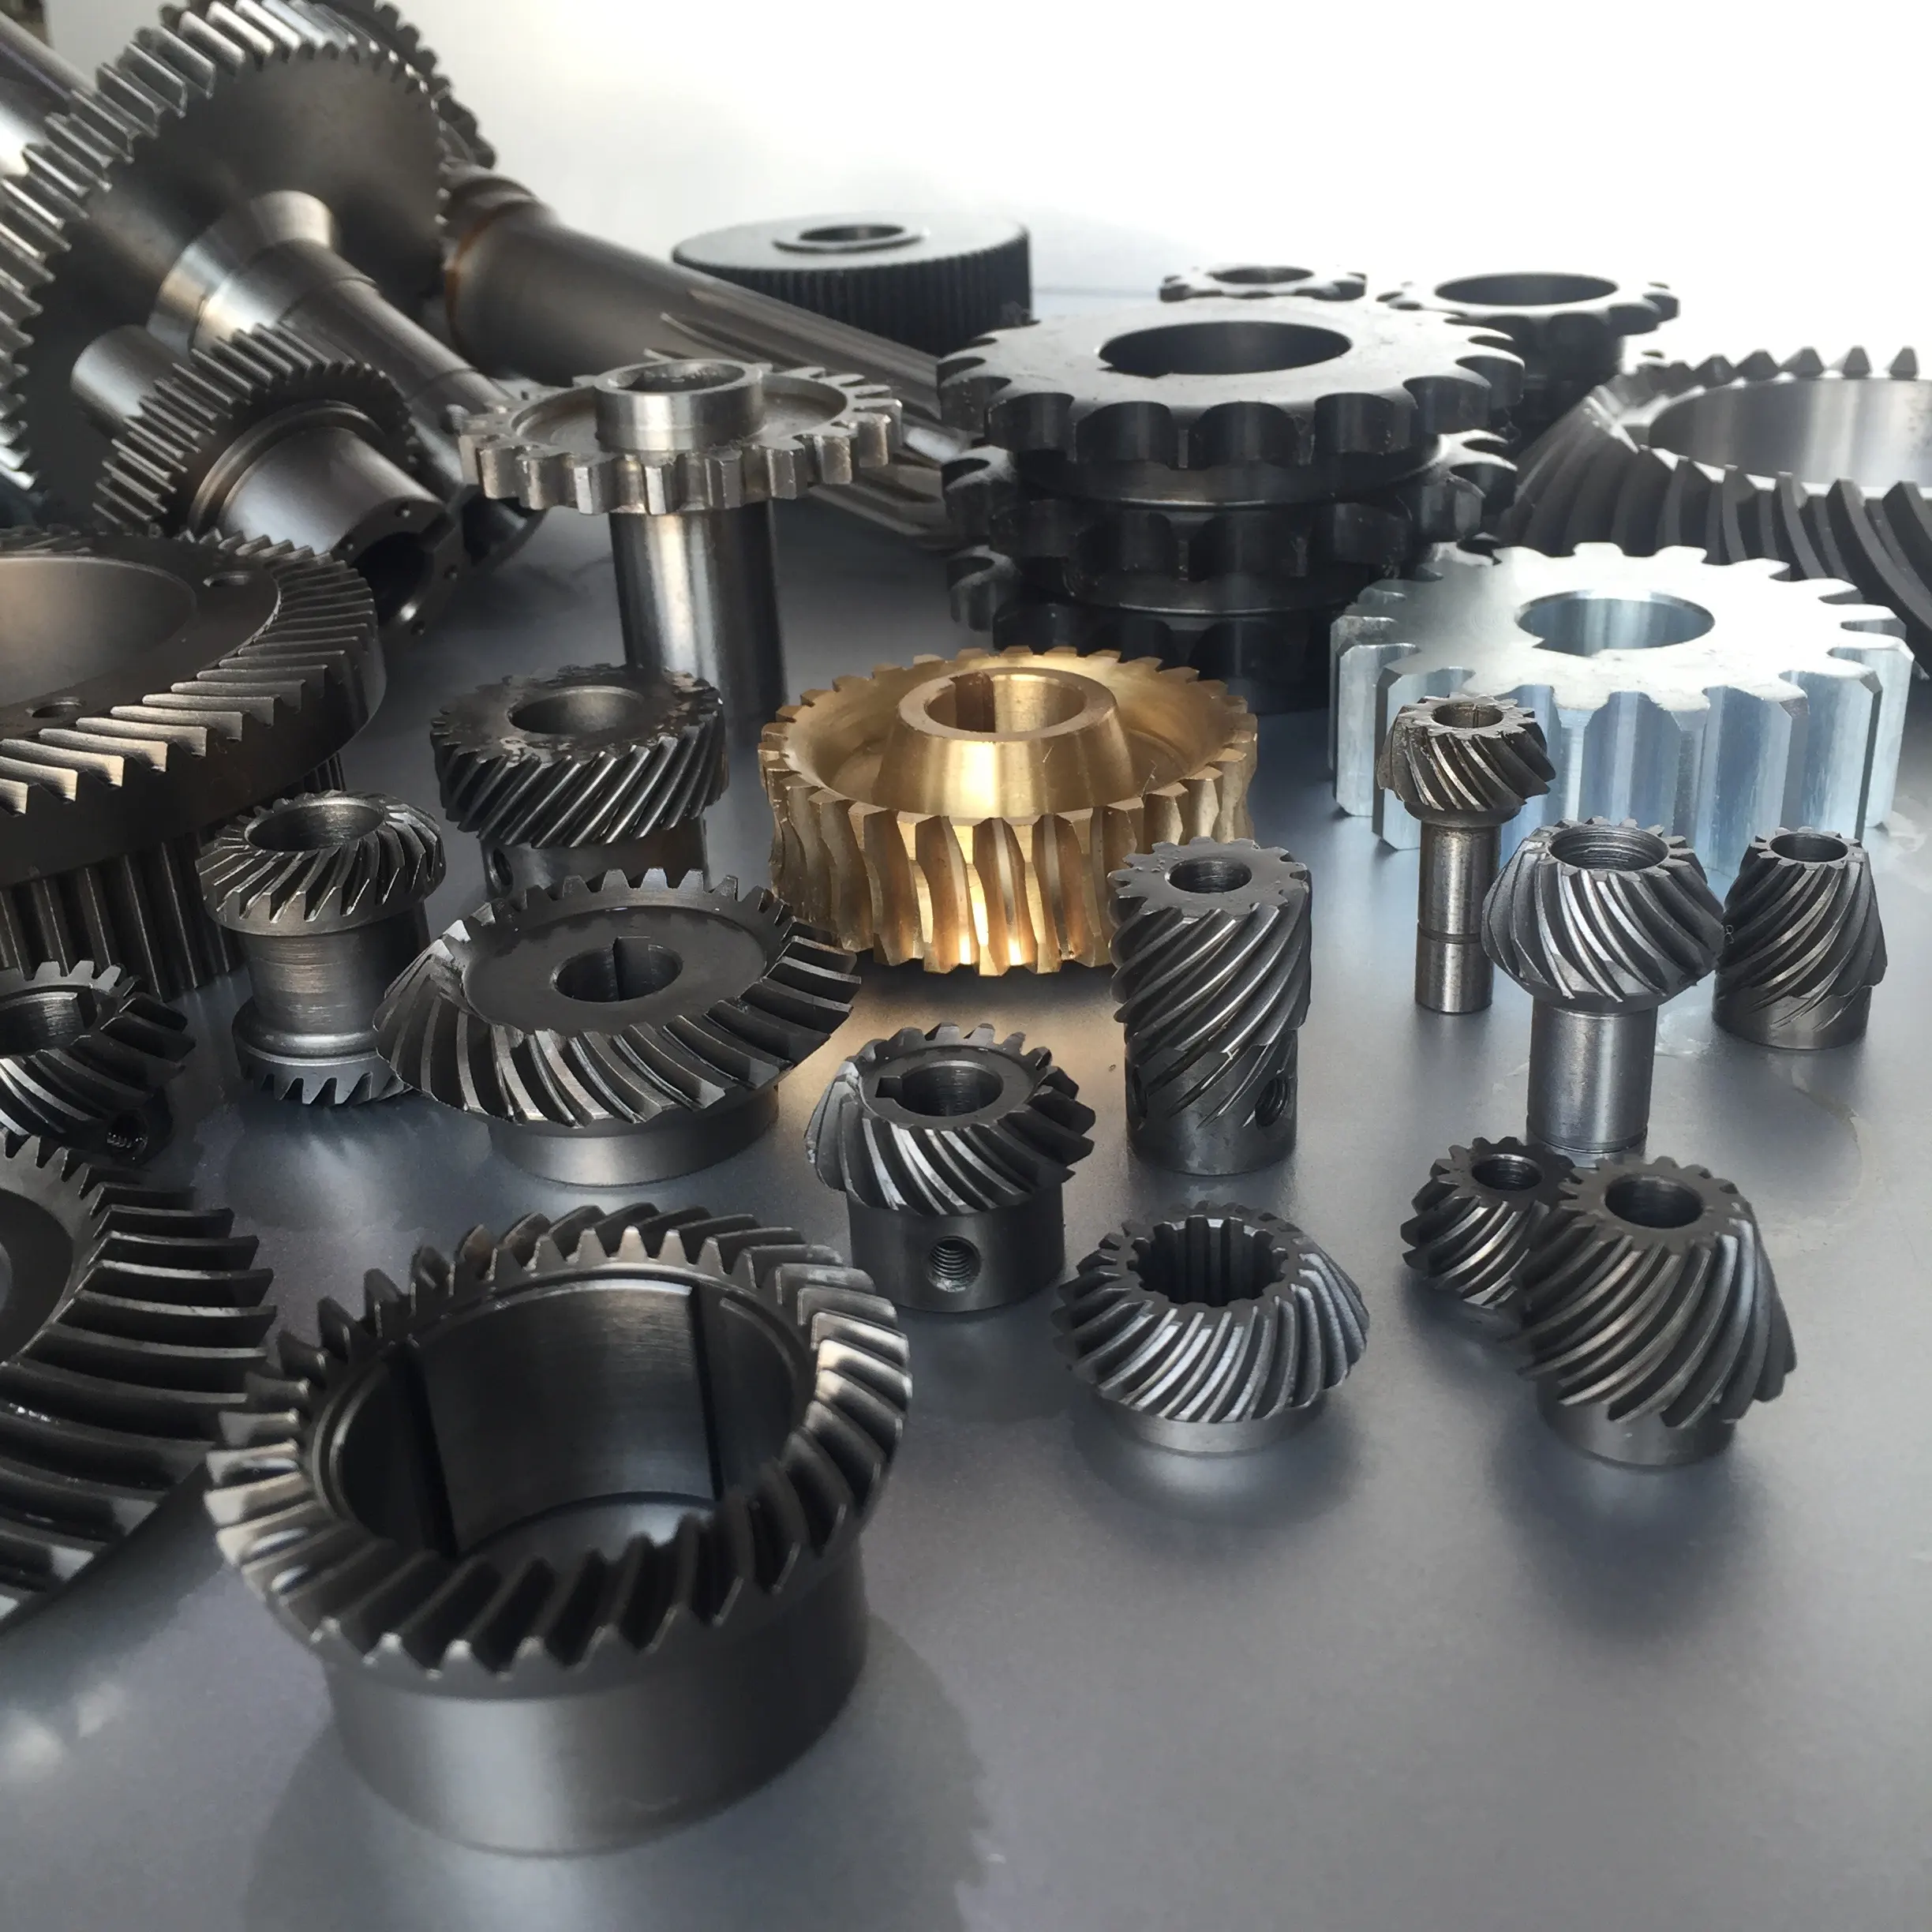 MW Spur Helical Pinion Shaft Galvanized Worm Wheel Worm Gear Spiral Bevel Gear with Spline for Power Tool and Garde